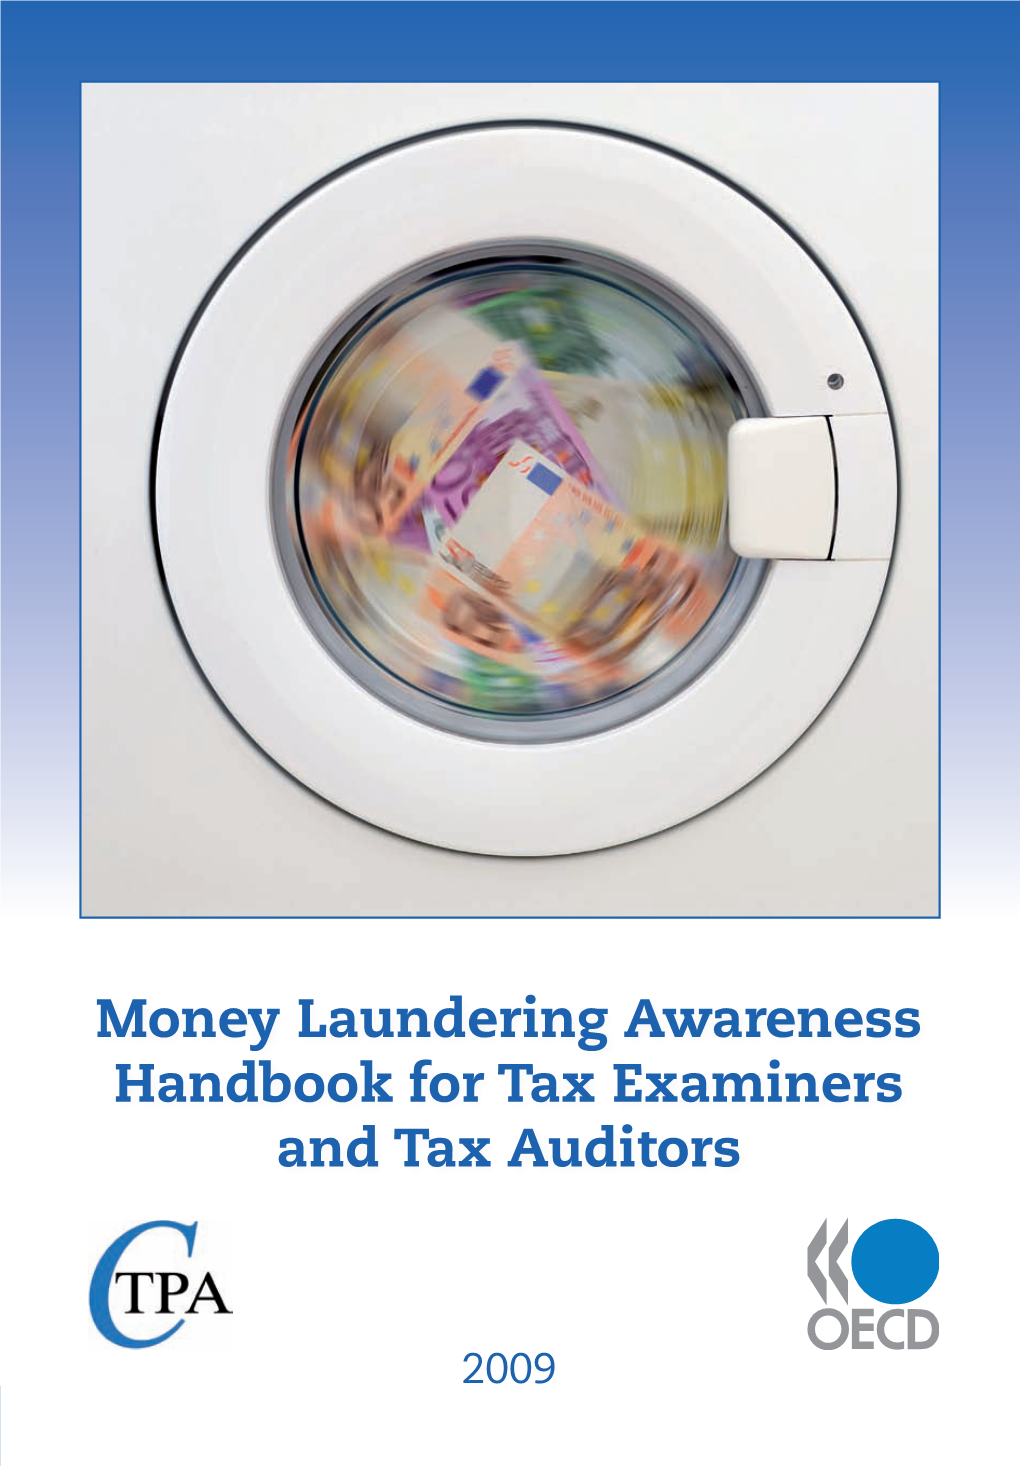 Money Laundering Awareness Handbook for Tax Examiners and Tax Auditors 2009